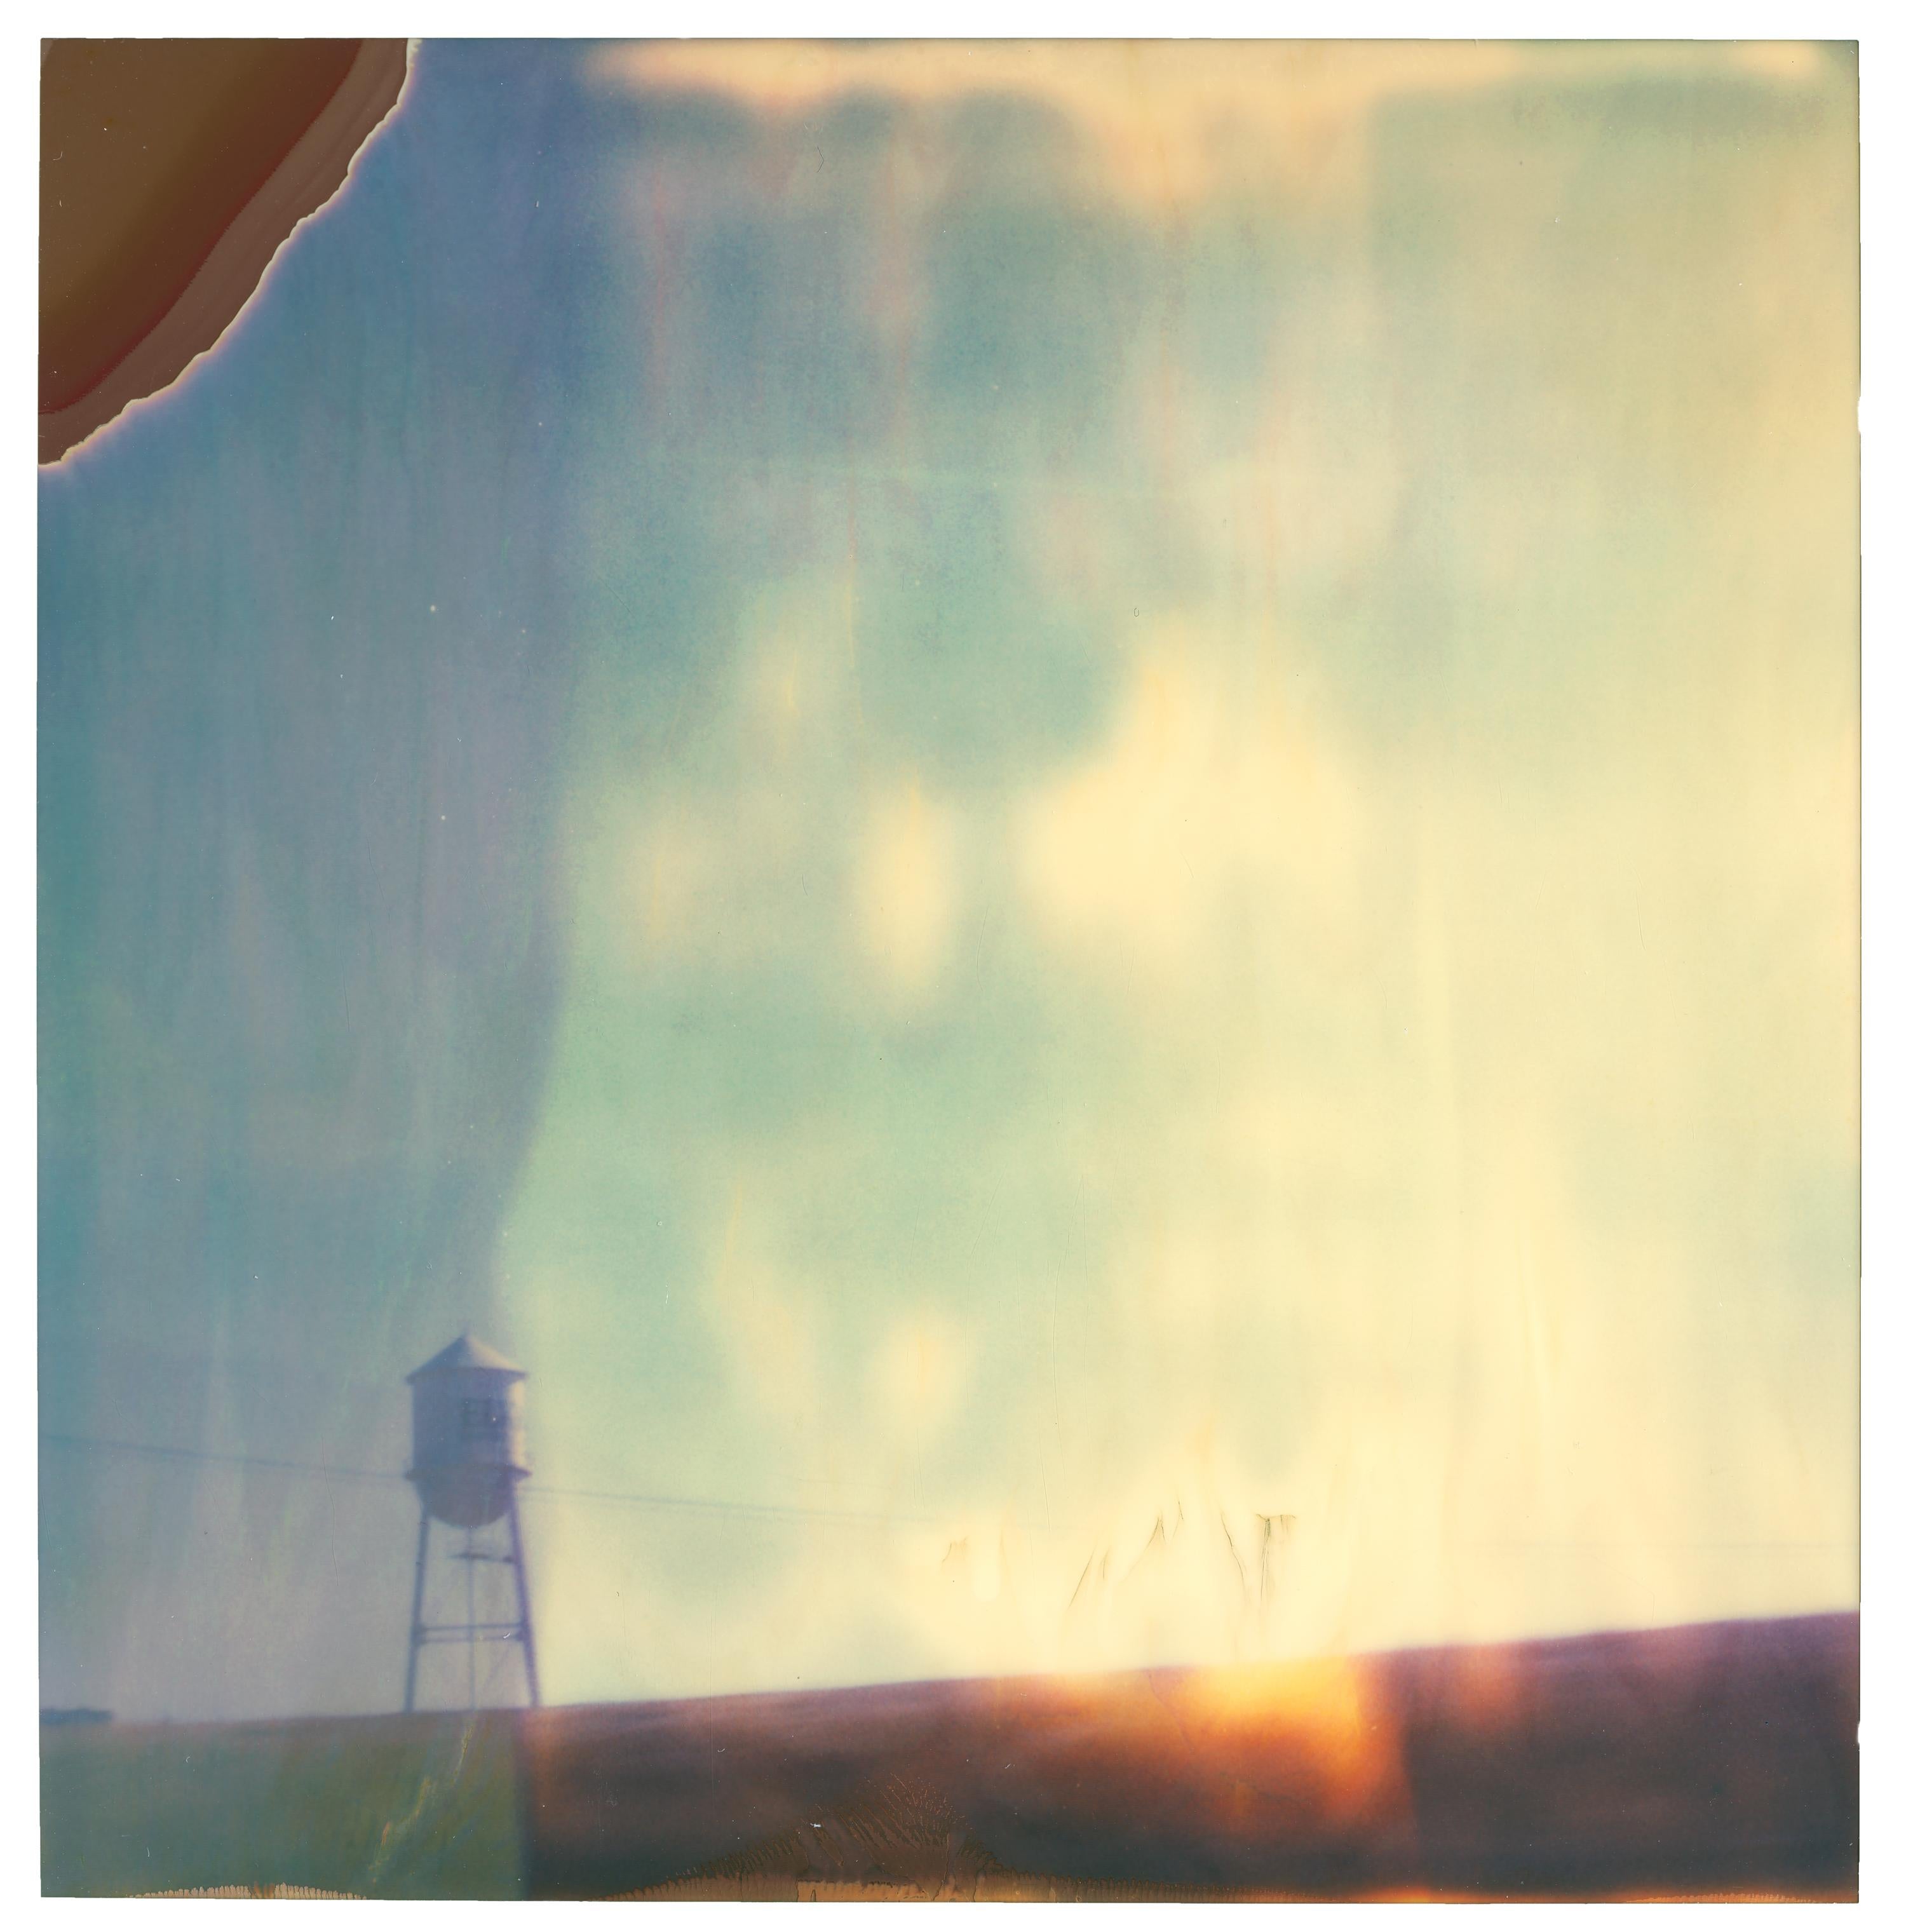 Water Tower (The Last Picture Show) - 21st Century, Polaroid, Color